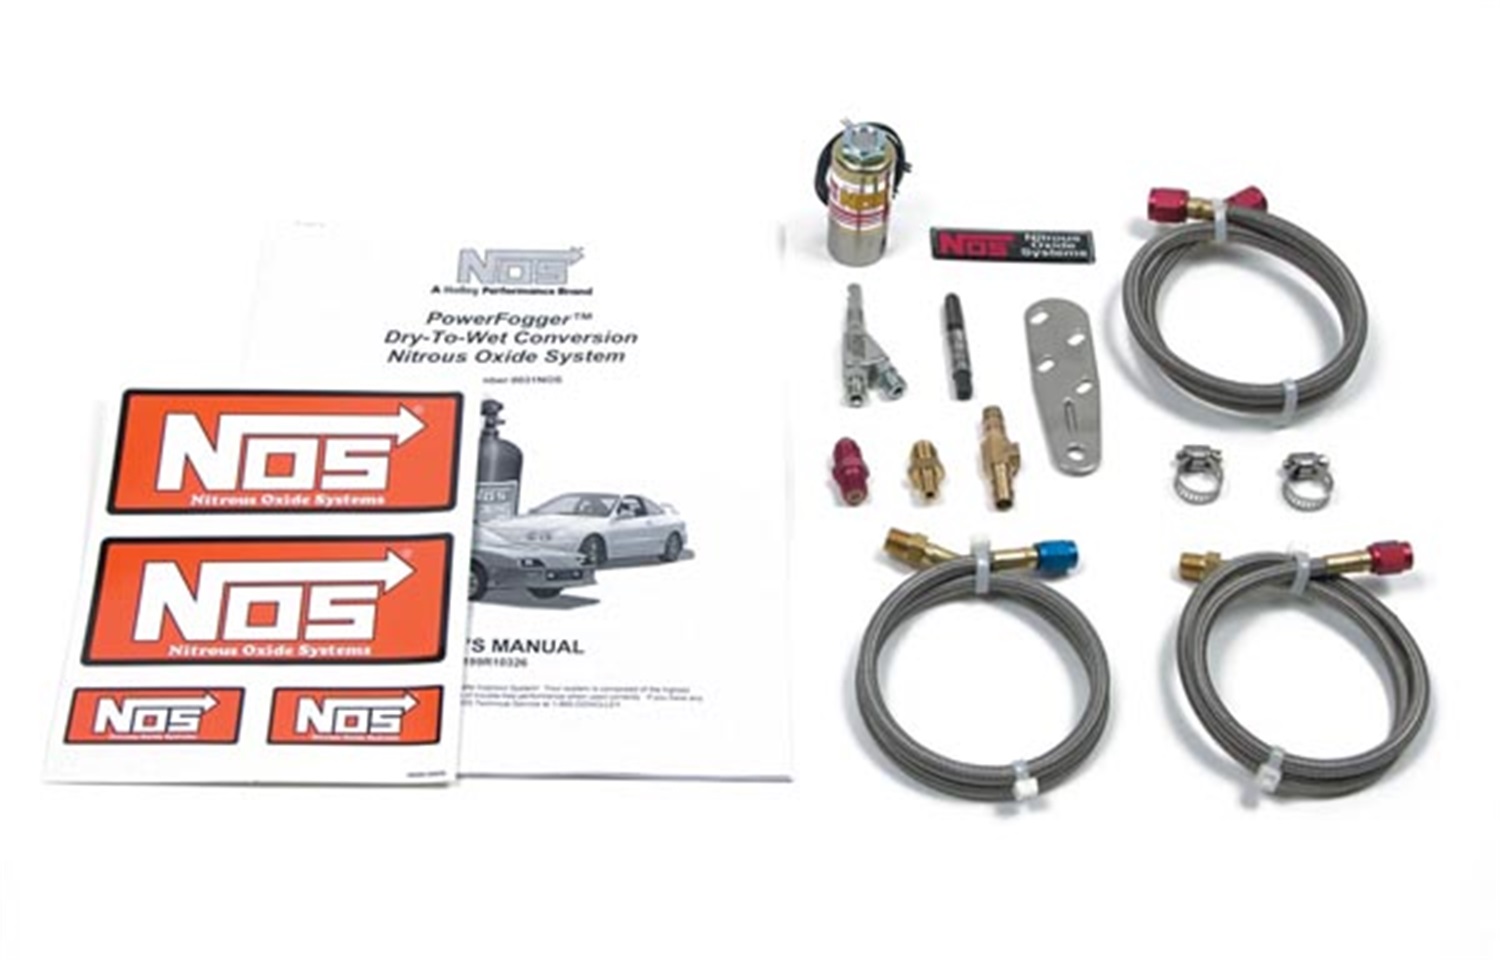 Nitrous Oxide Injection System Kit, NOS Misc Kits, CONVERSION-DRY TO WET KIT